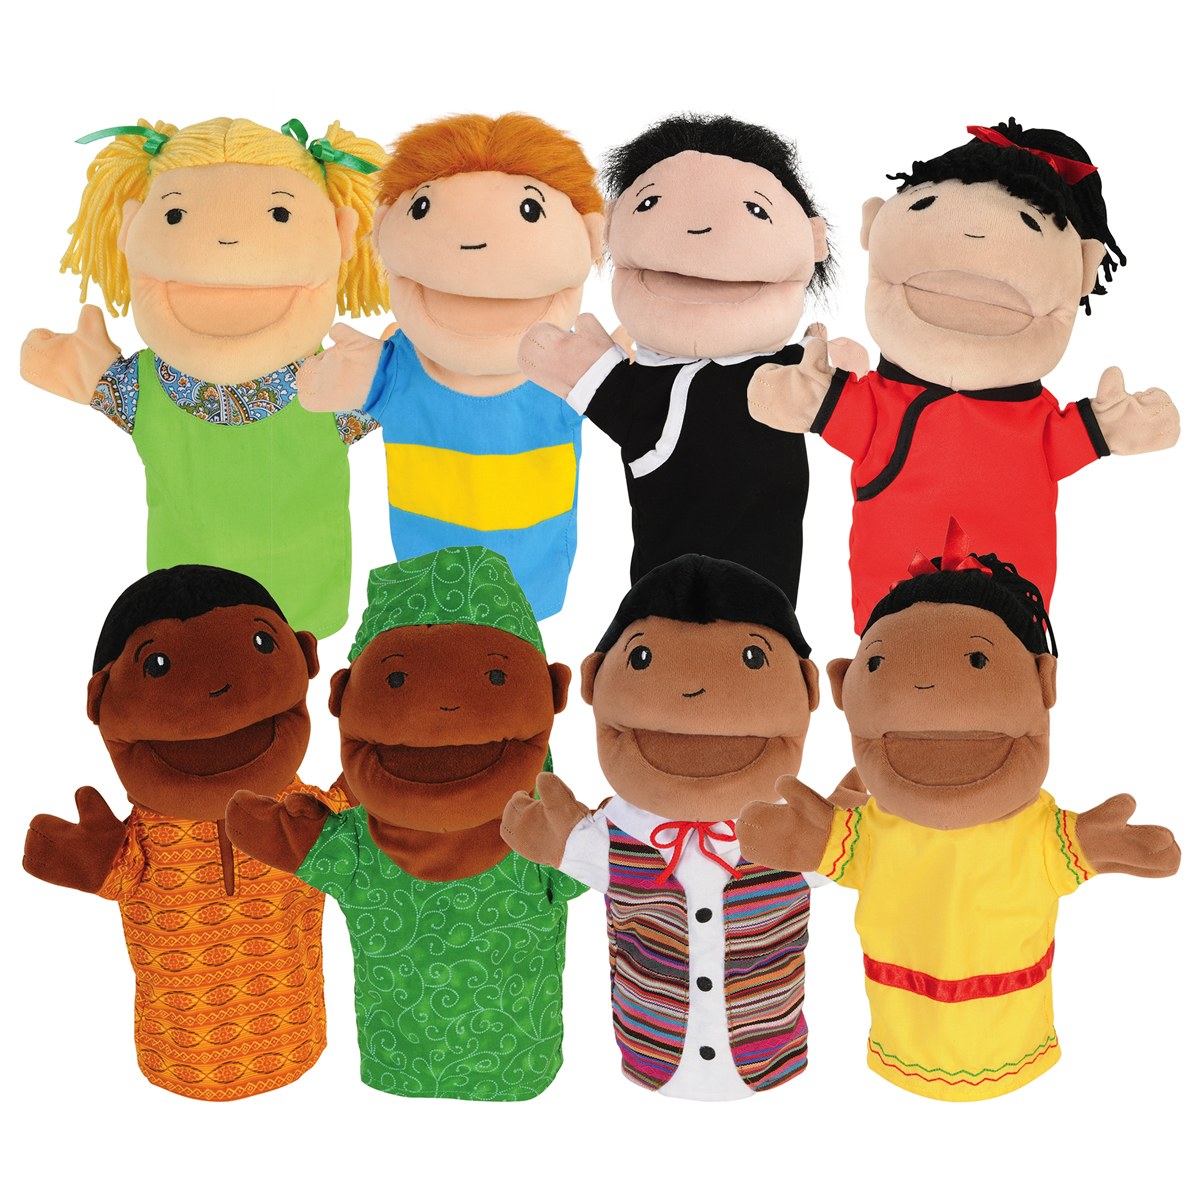 Kaplan Early Learning Company Diversity Puppets - Set of 8